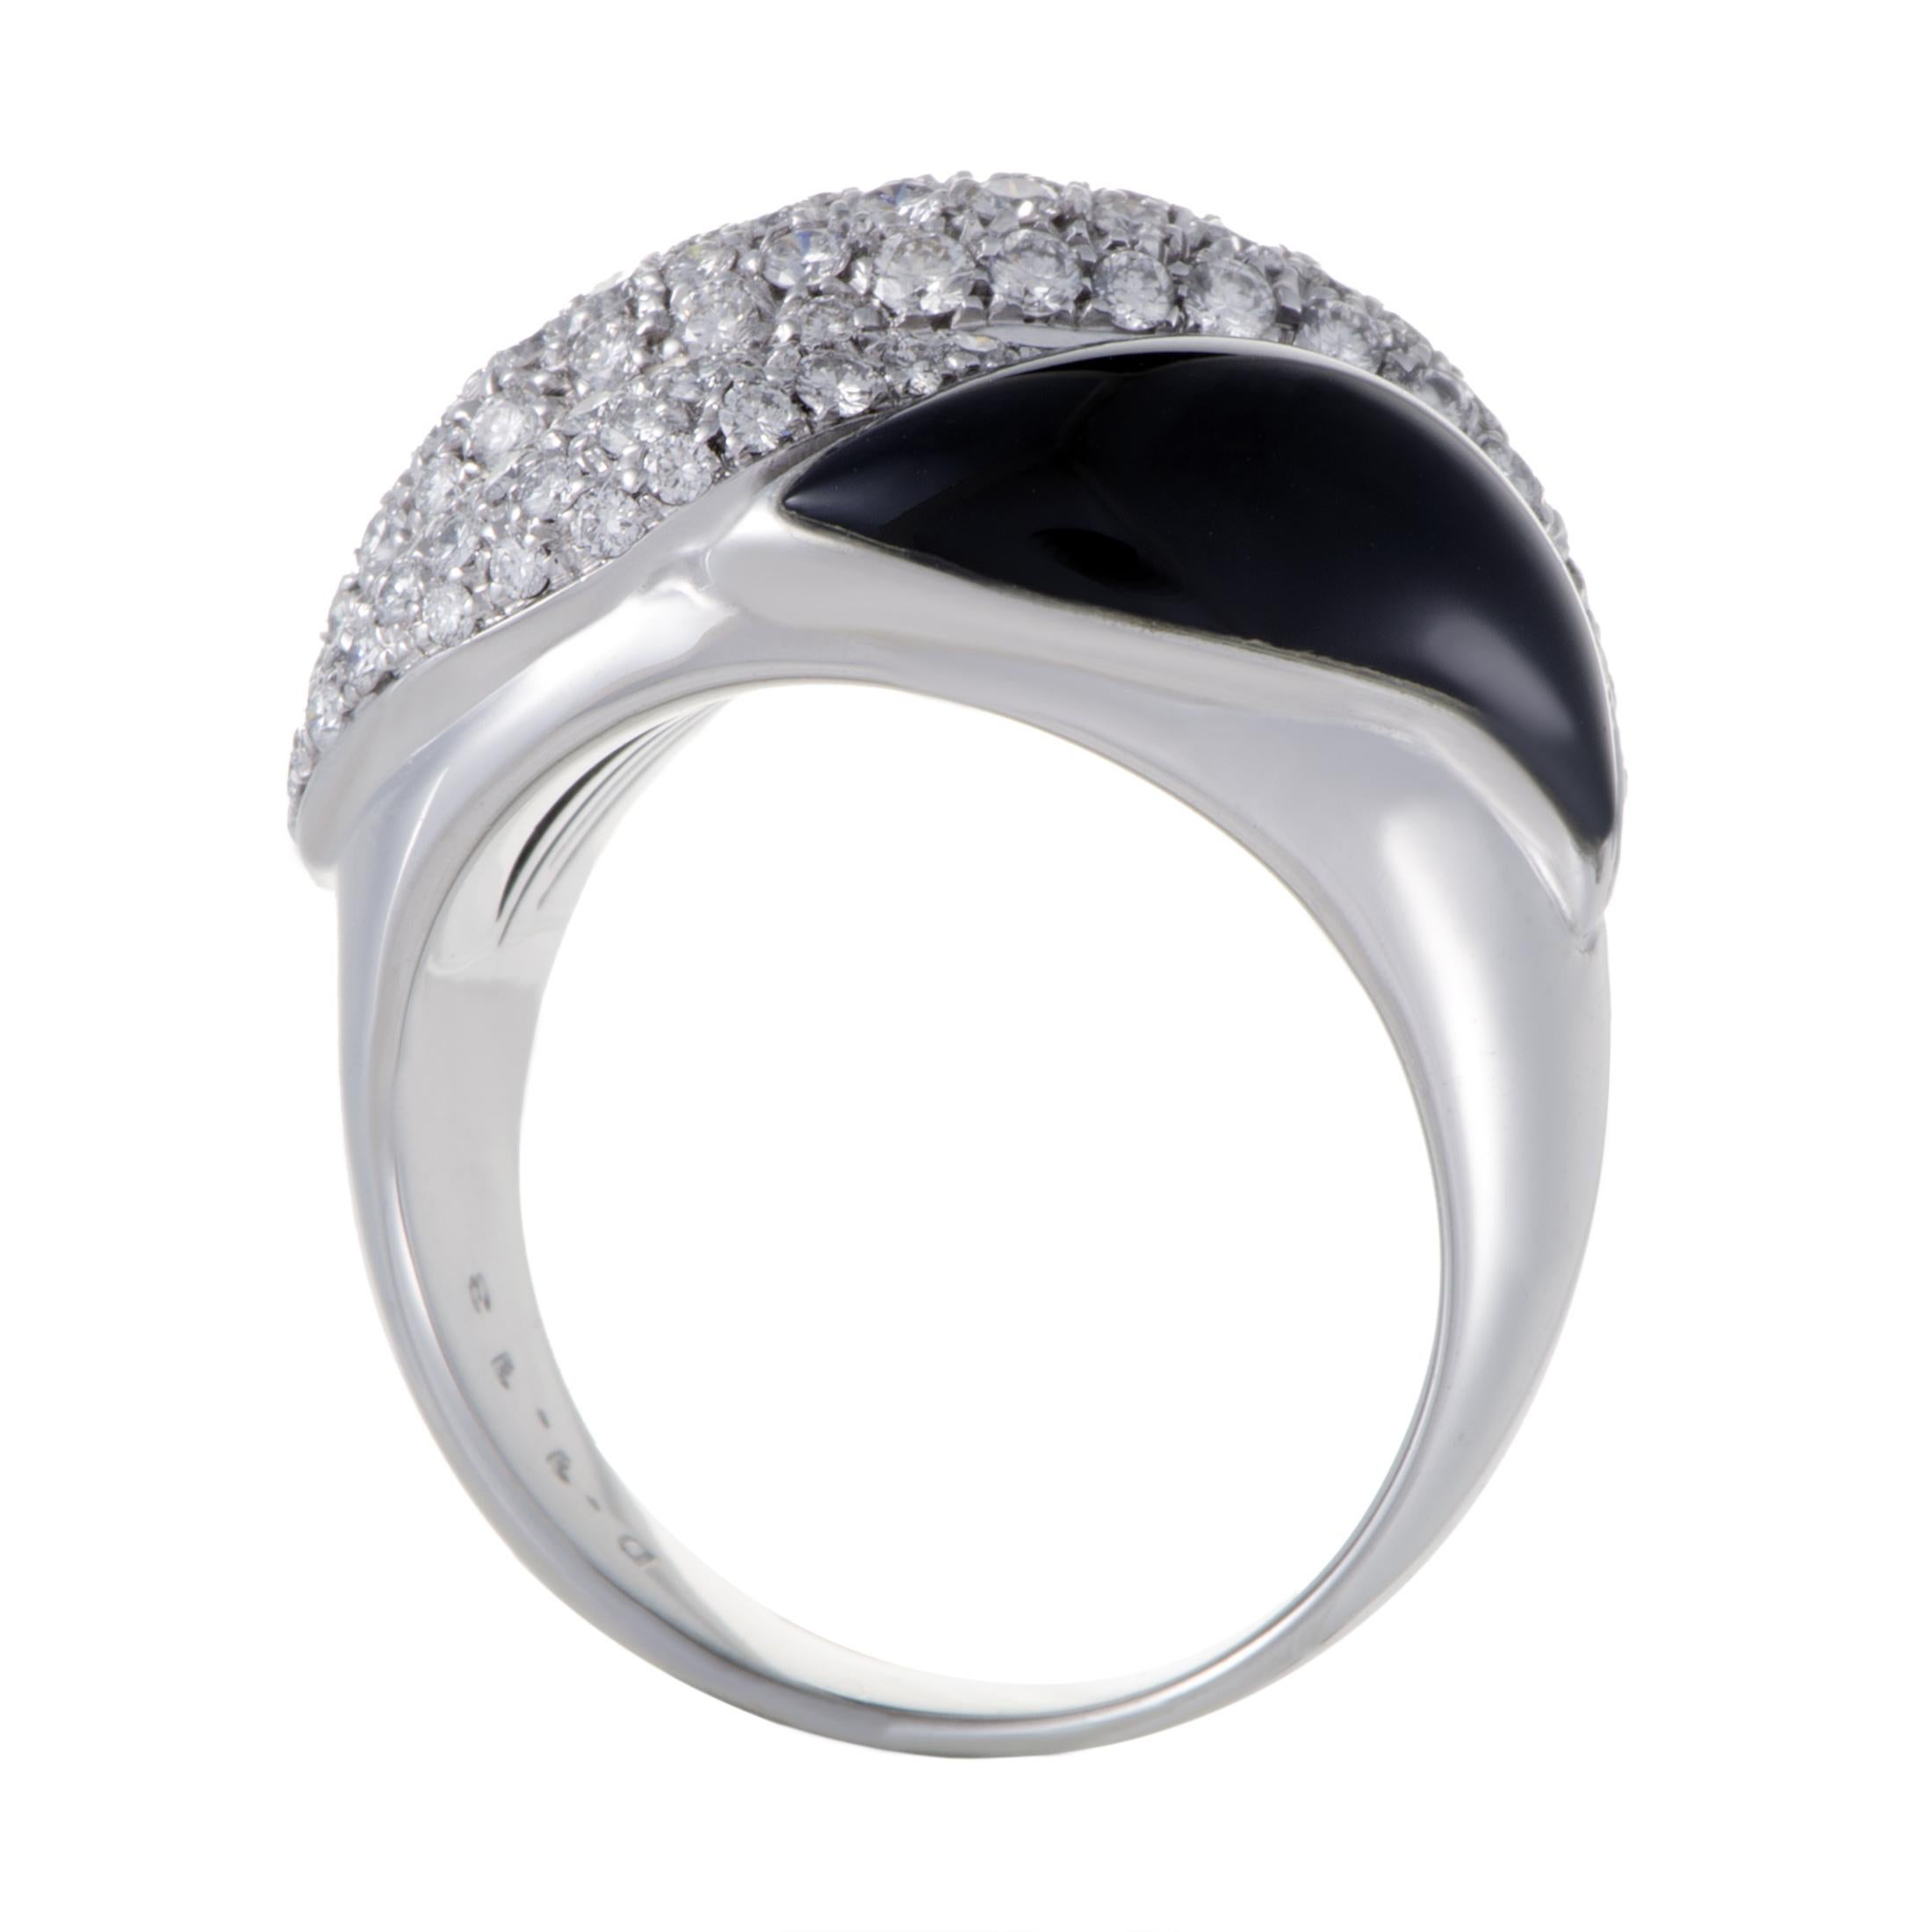 A staggering and attractively striking contrast is created by combining resplendent diamonds weighing in total 1.13 carats with captivating onyx stones in this majestic Picchiotti ring made of 18K white gold that boasts a magnificently graceful